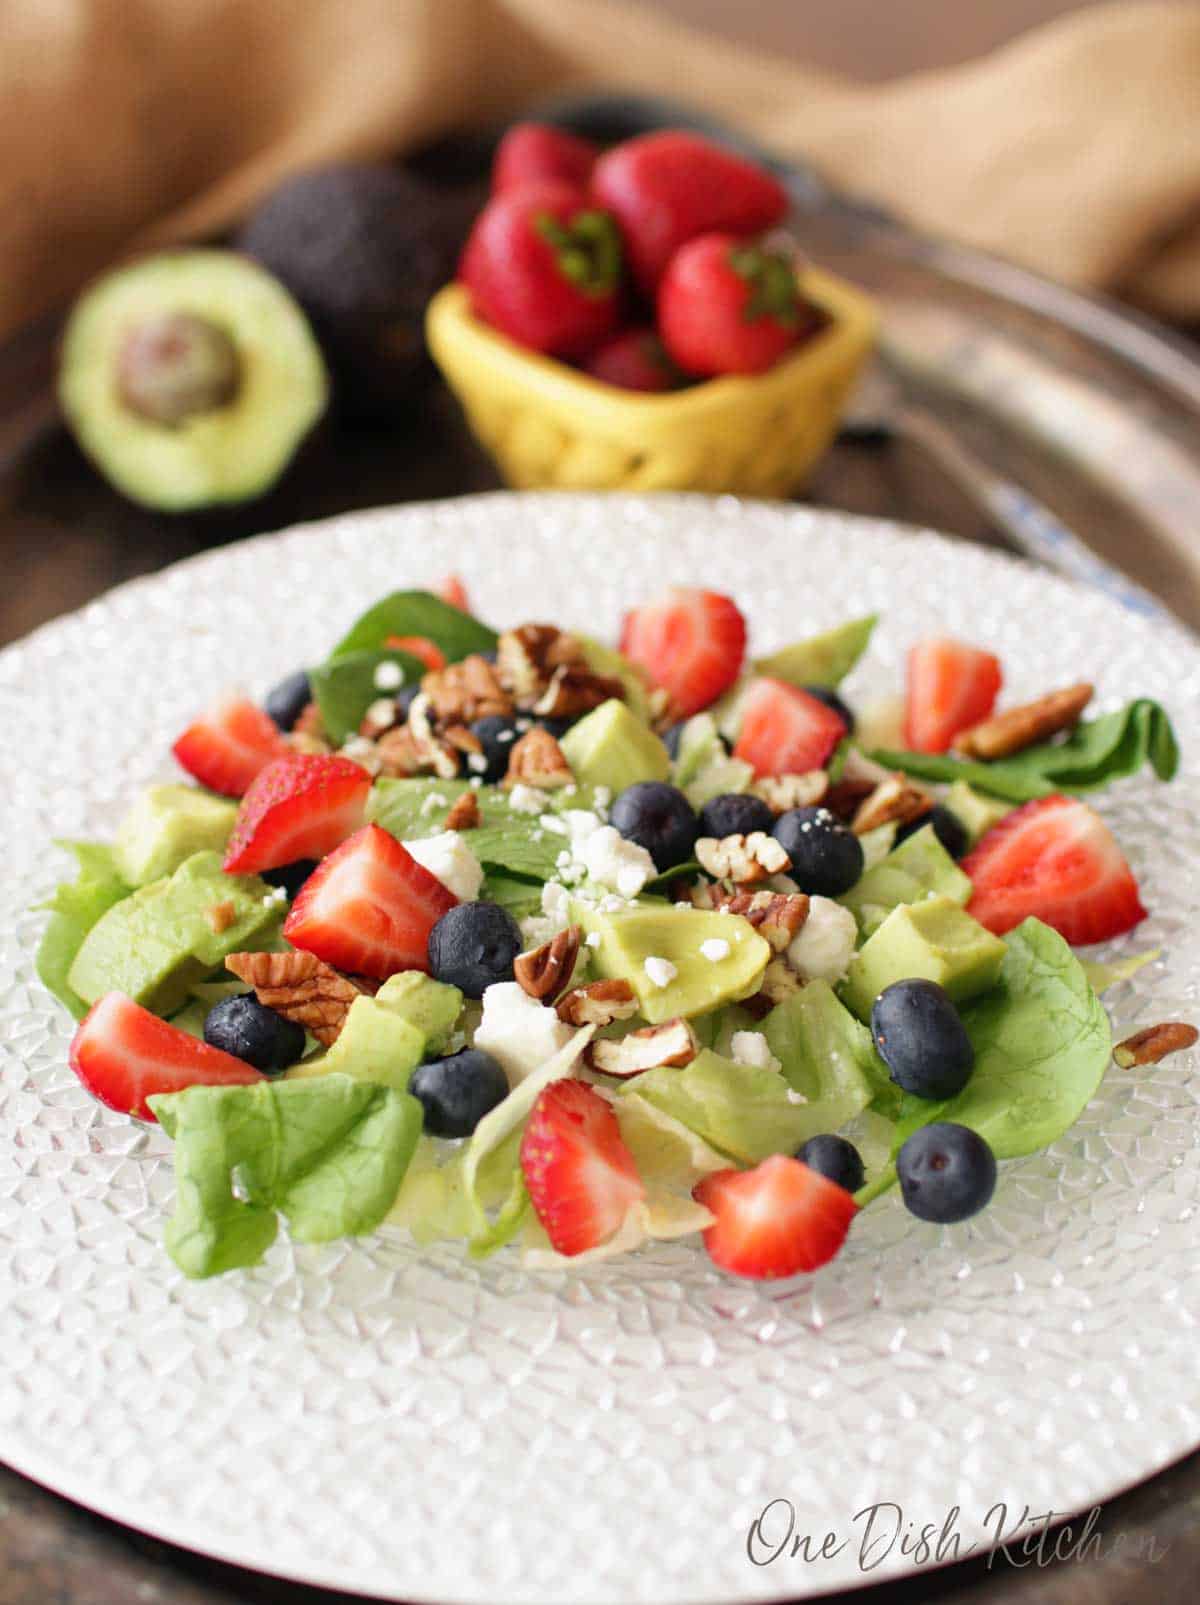 A salad of avocados, strawberries, blueberries, pecans, feta cheese, and spinach plated on a metal tray with a small bowl of strawberries and half of an avocado 